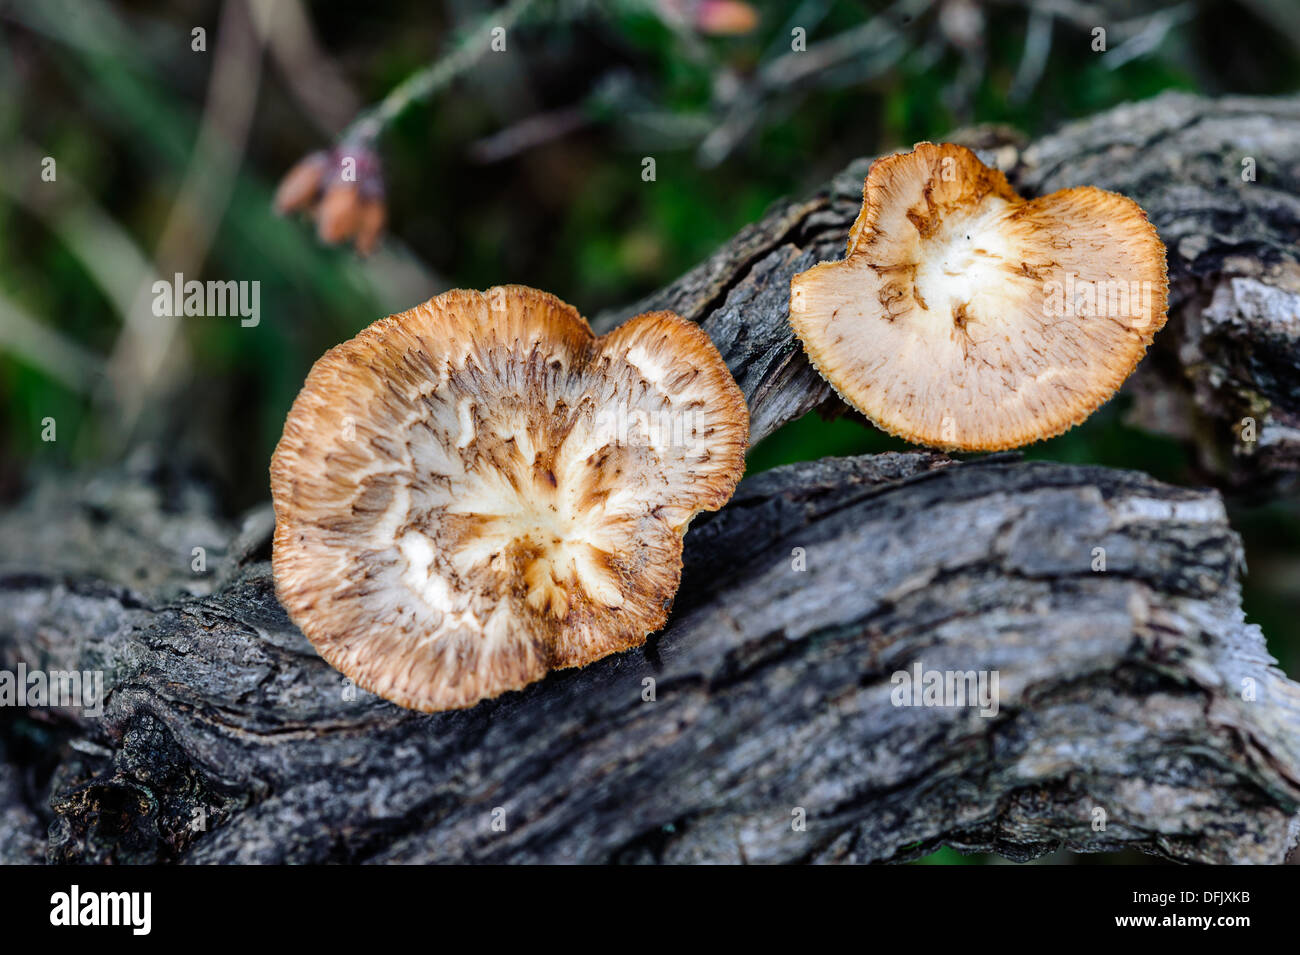 Honey fungus is the common name of several species of fungi within the genus Armillaria. Honey fungus spreads underground. Stock Photo